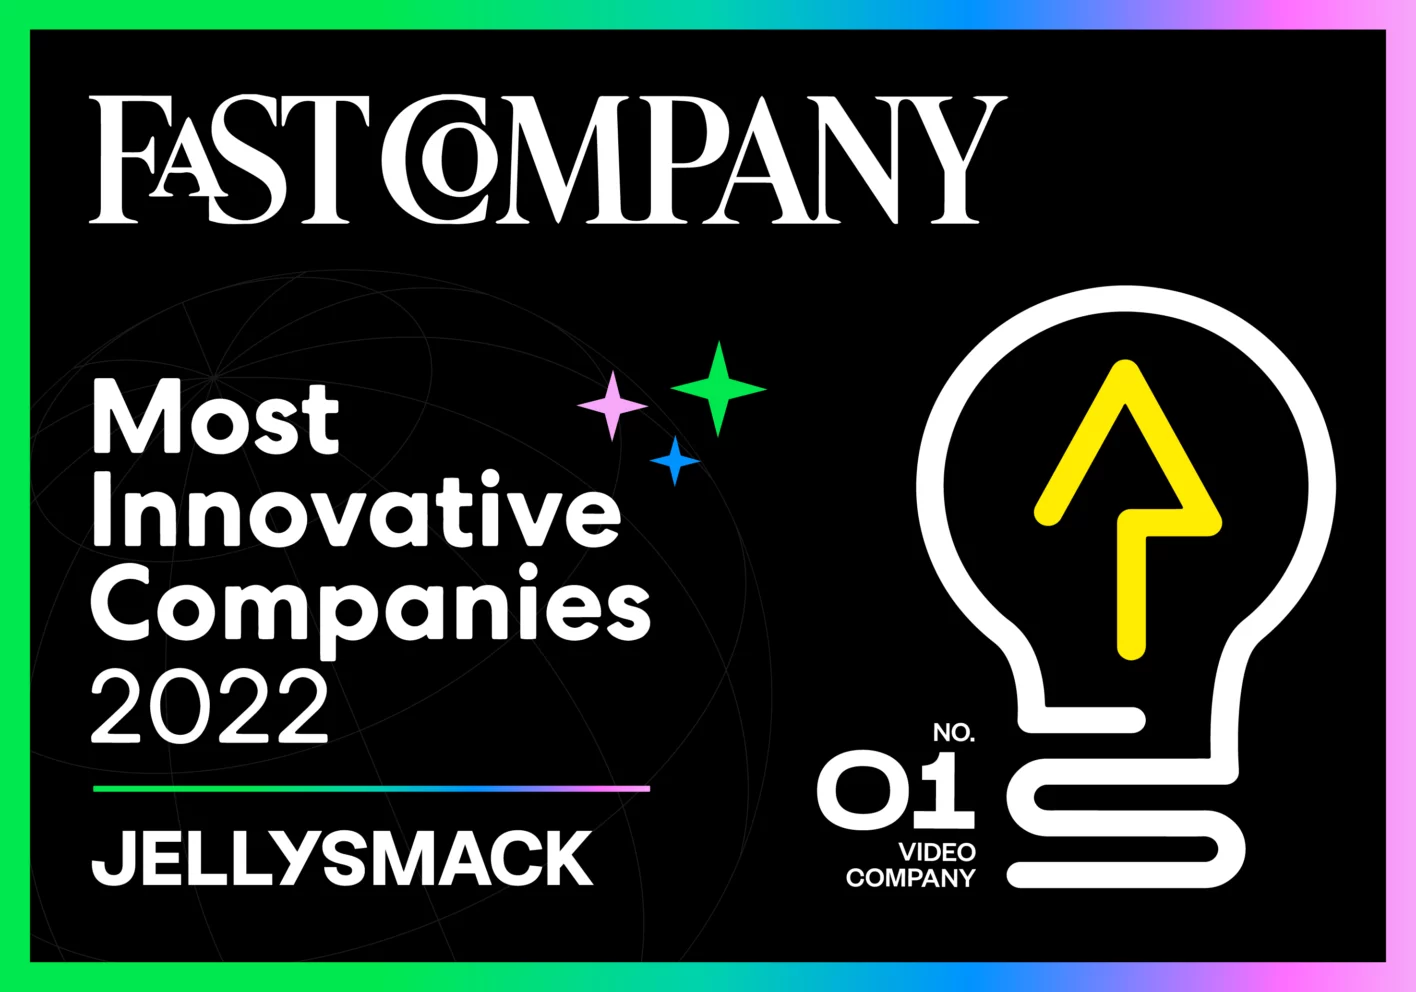 White Fast Company logo with "Most Innovative Companies 2022 - Jellysmack" in white underneath and light bulb graphic on on black background.